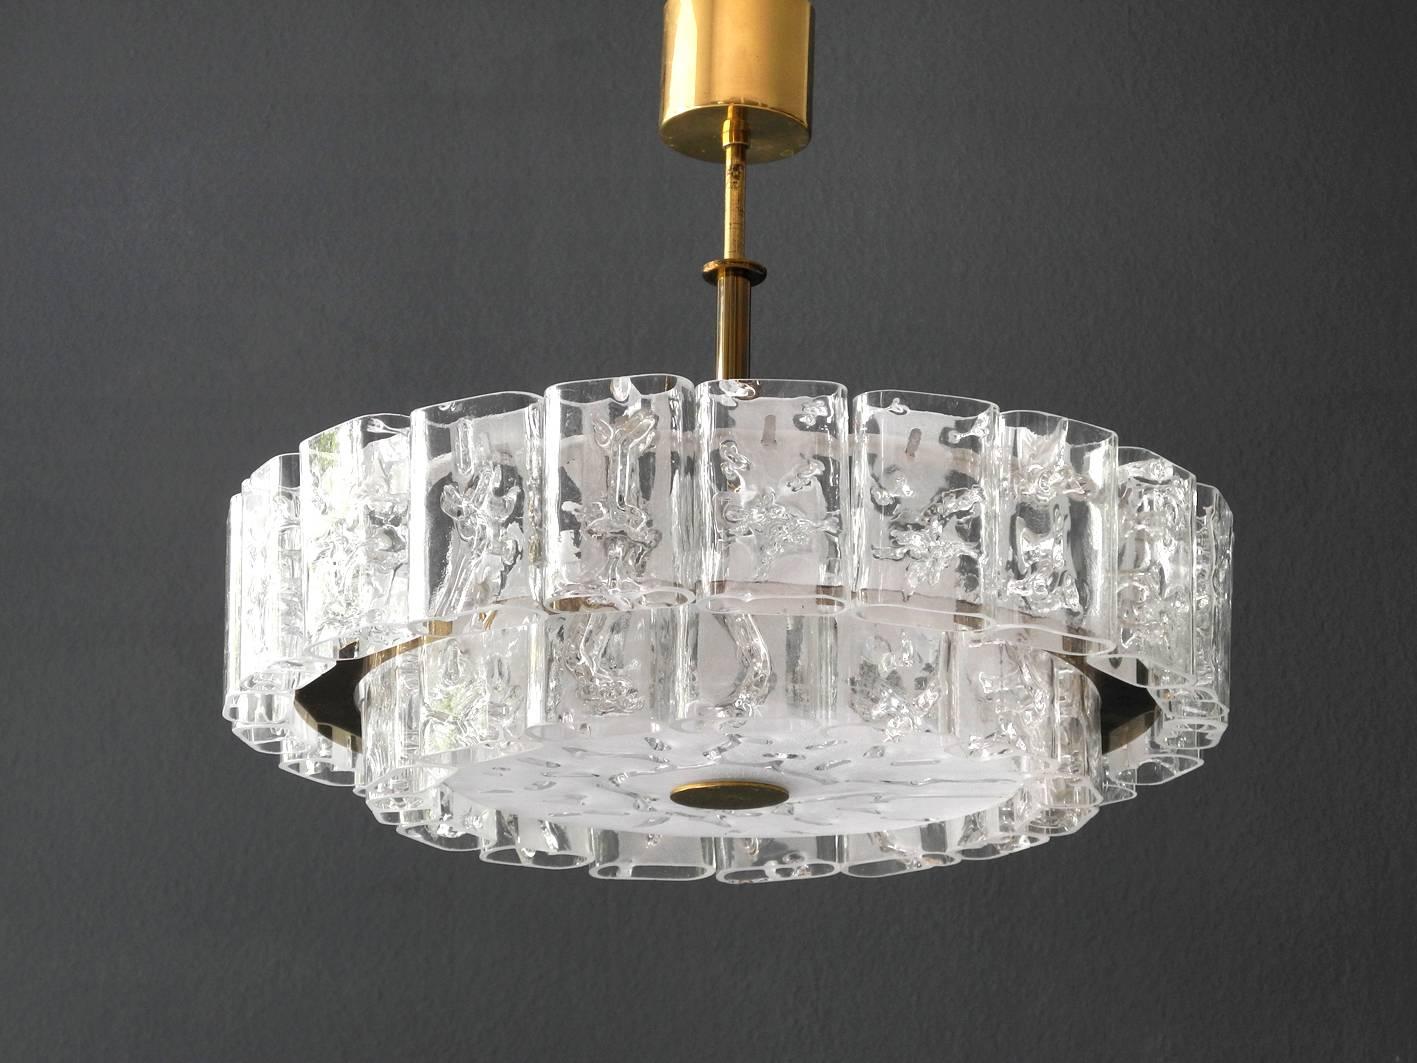 Very imposing beautiful large original Mid-Century Modern crystal glass chandelier. Made by Doria with original label. Two different sized glass stones are hung up in two rows. With 21 large and 15 small crystal glasses and a large glass pane below.